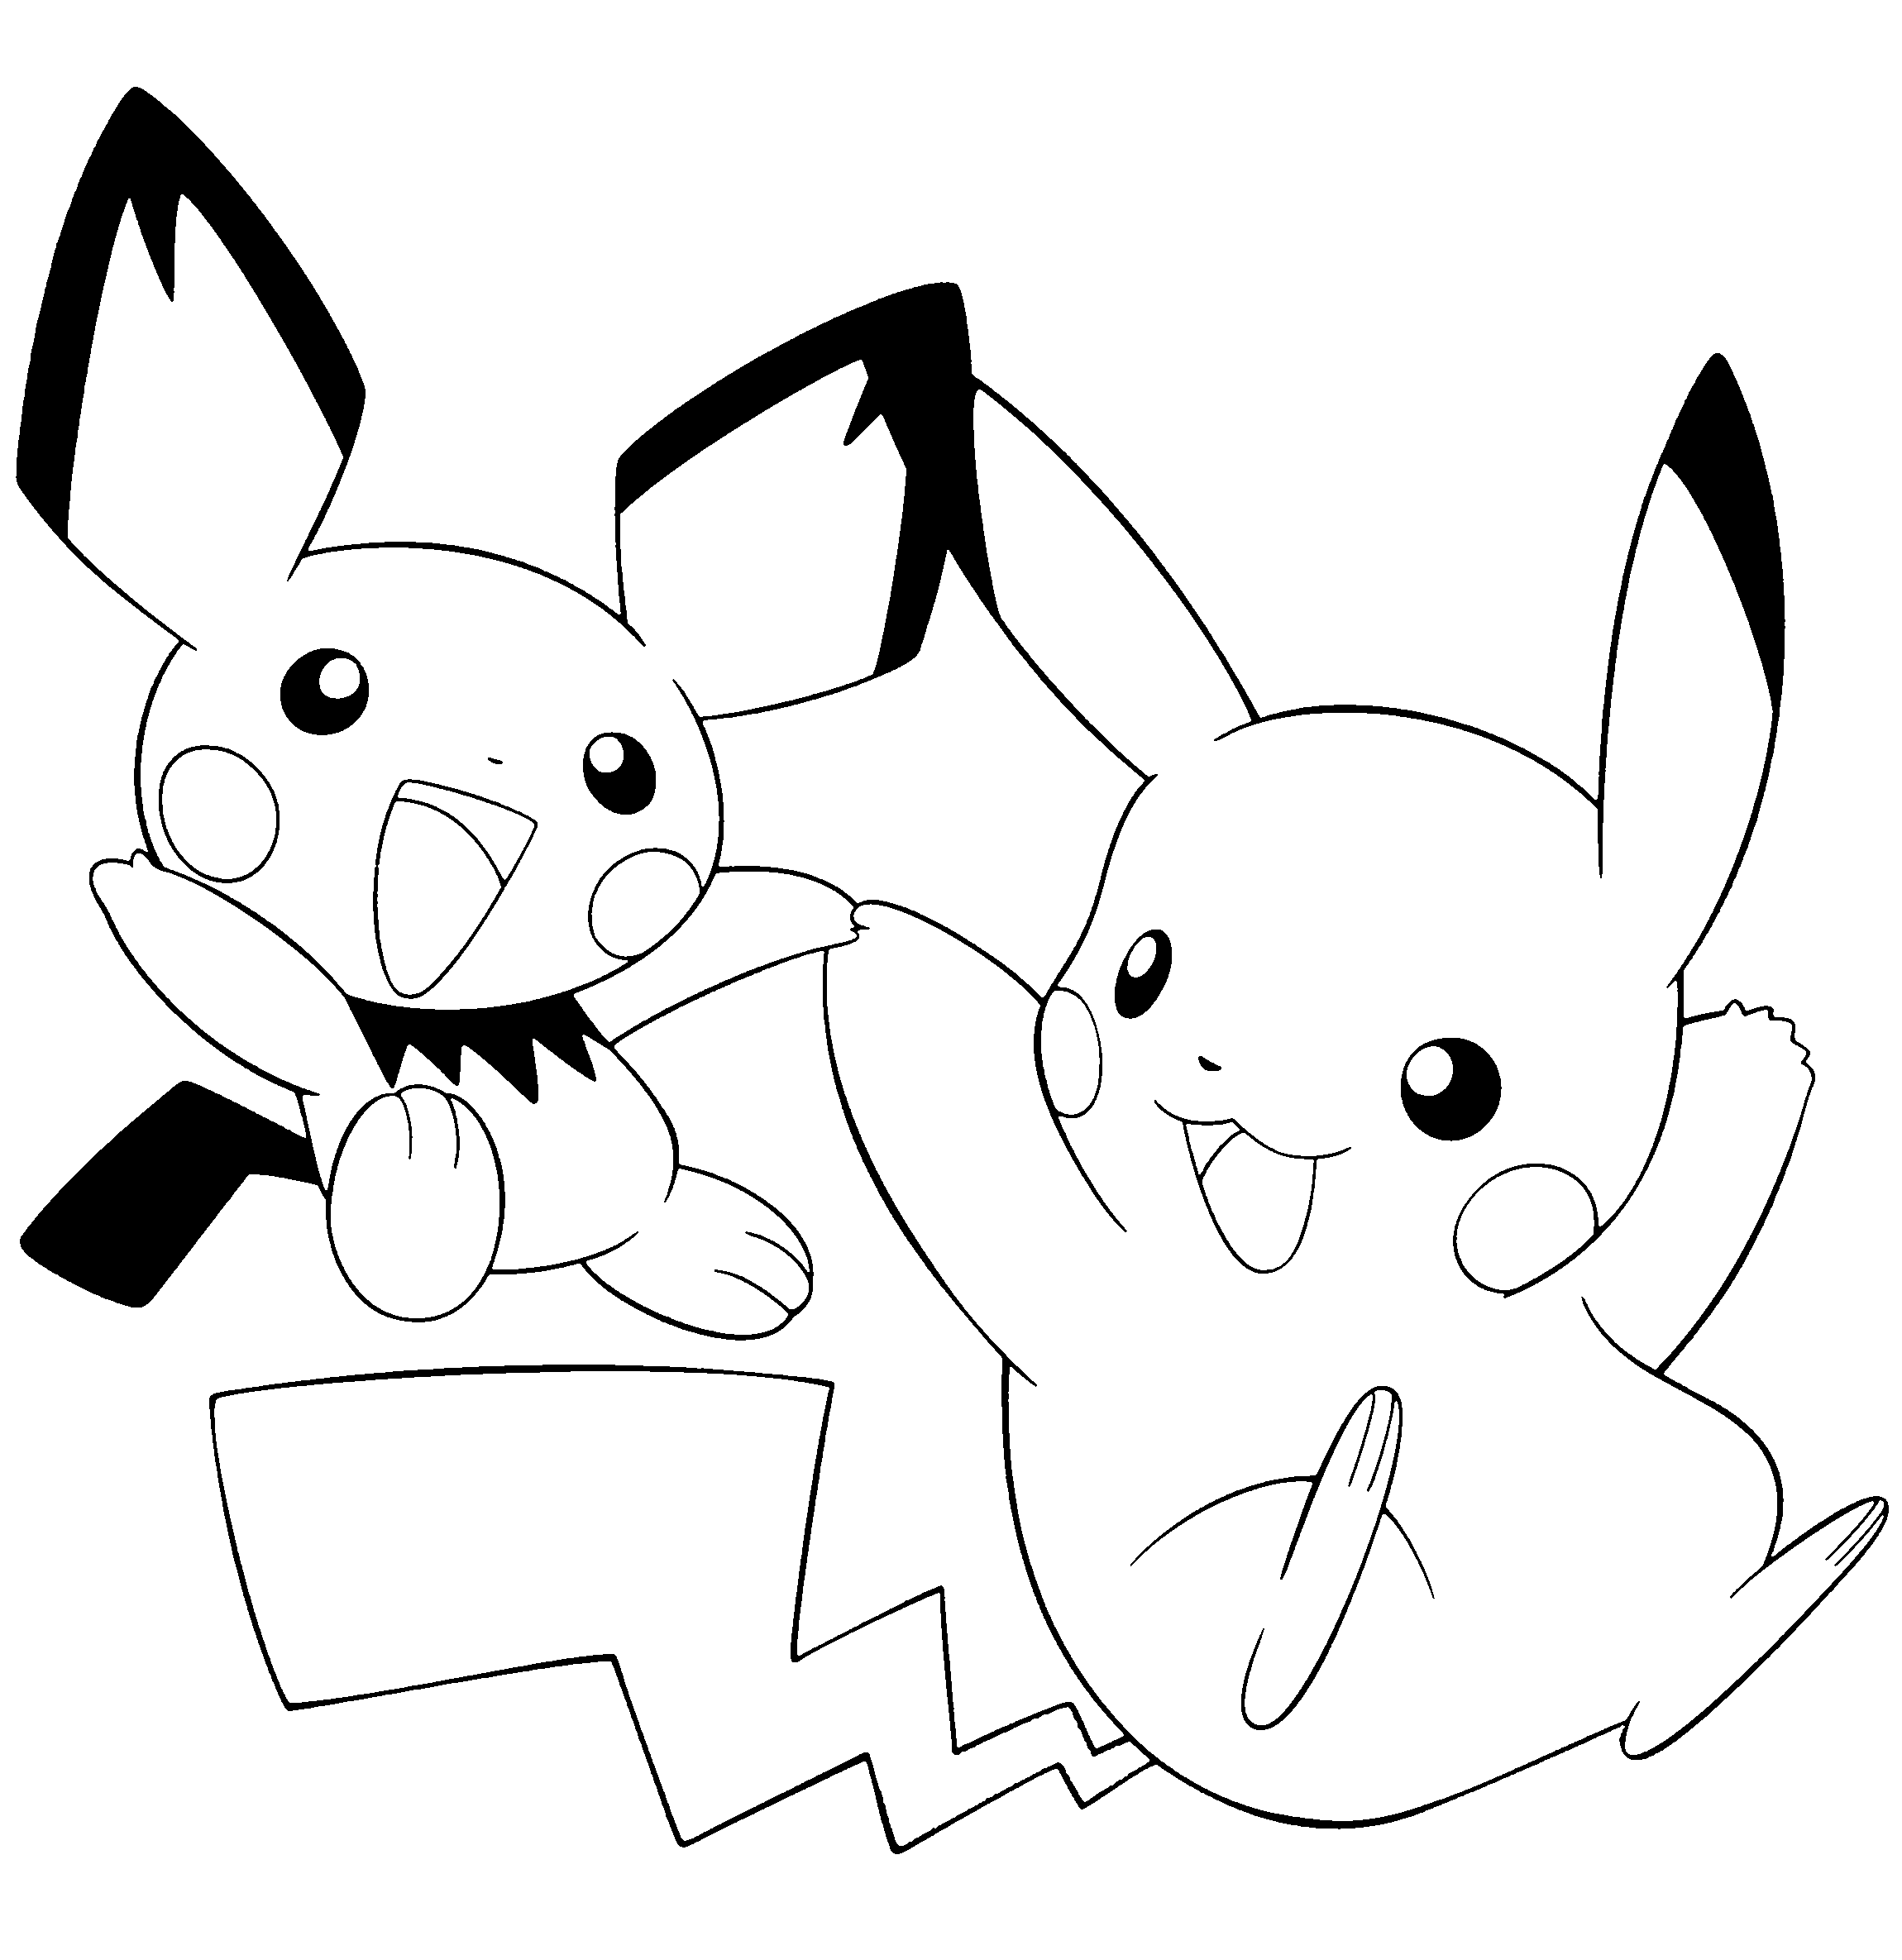 pikachu-coloring-pages